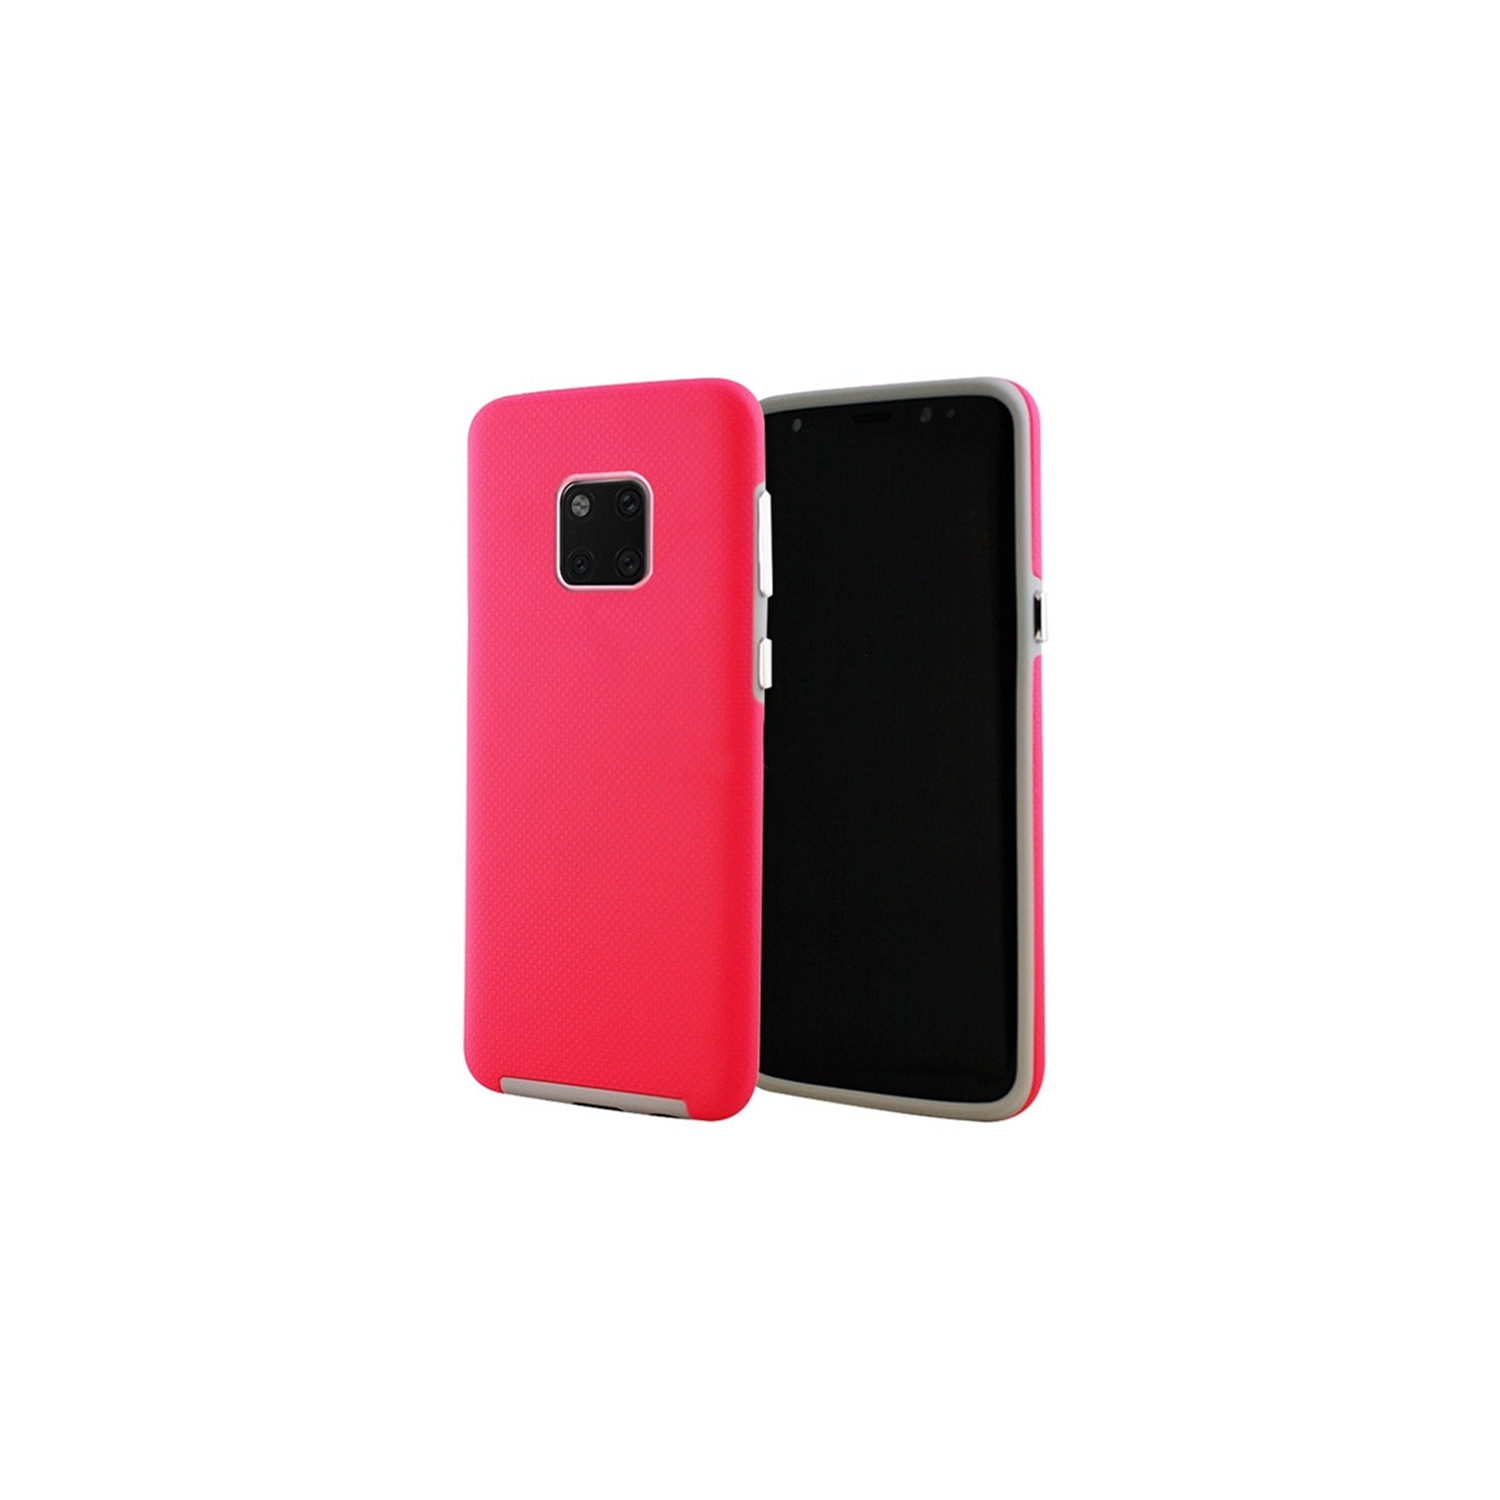 【CSmart】 Slim Fitted Hybrid Hard PC Shell Shockproof Scratch Resistant Case Cover for Huawei Mate 20 Pro, Hot Pink